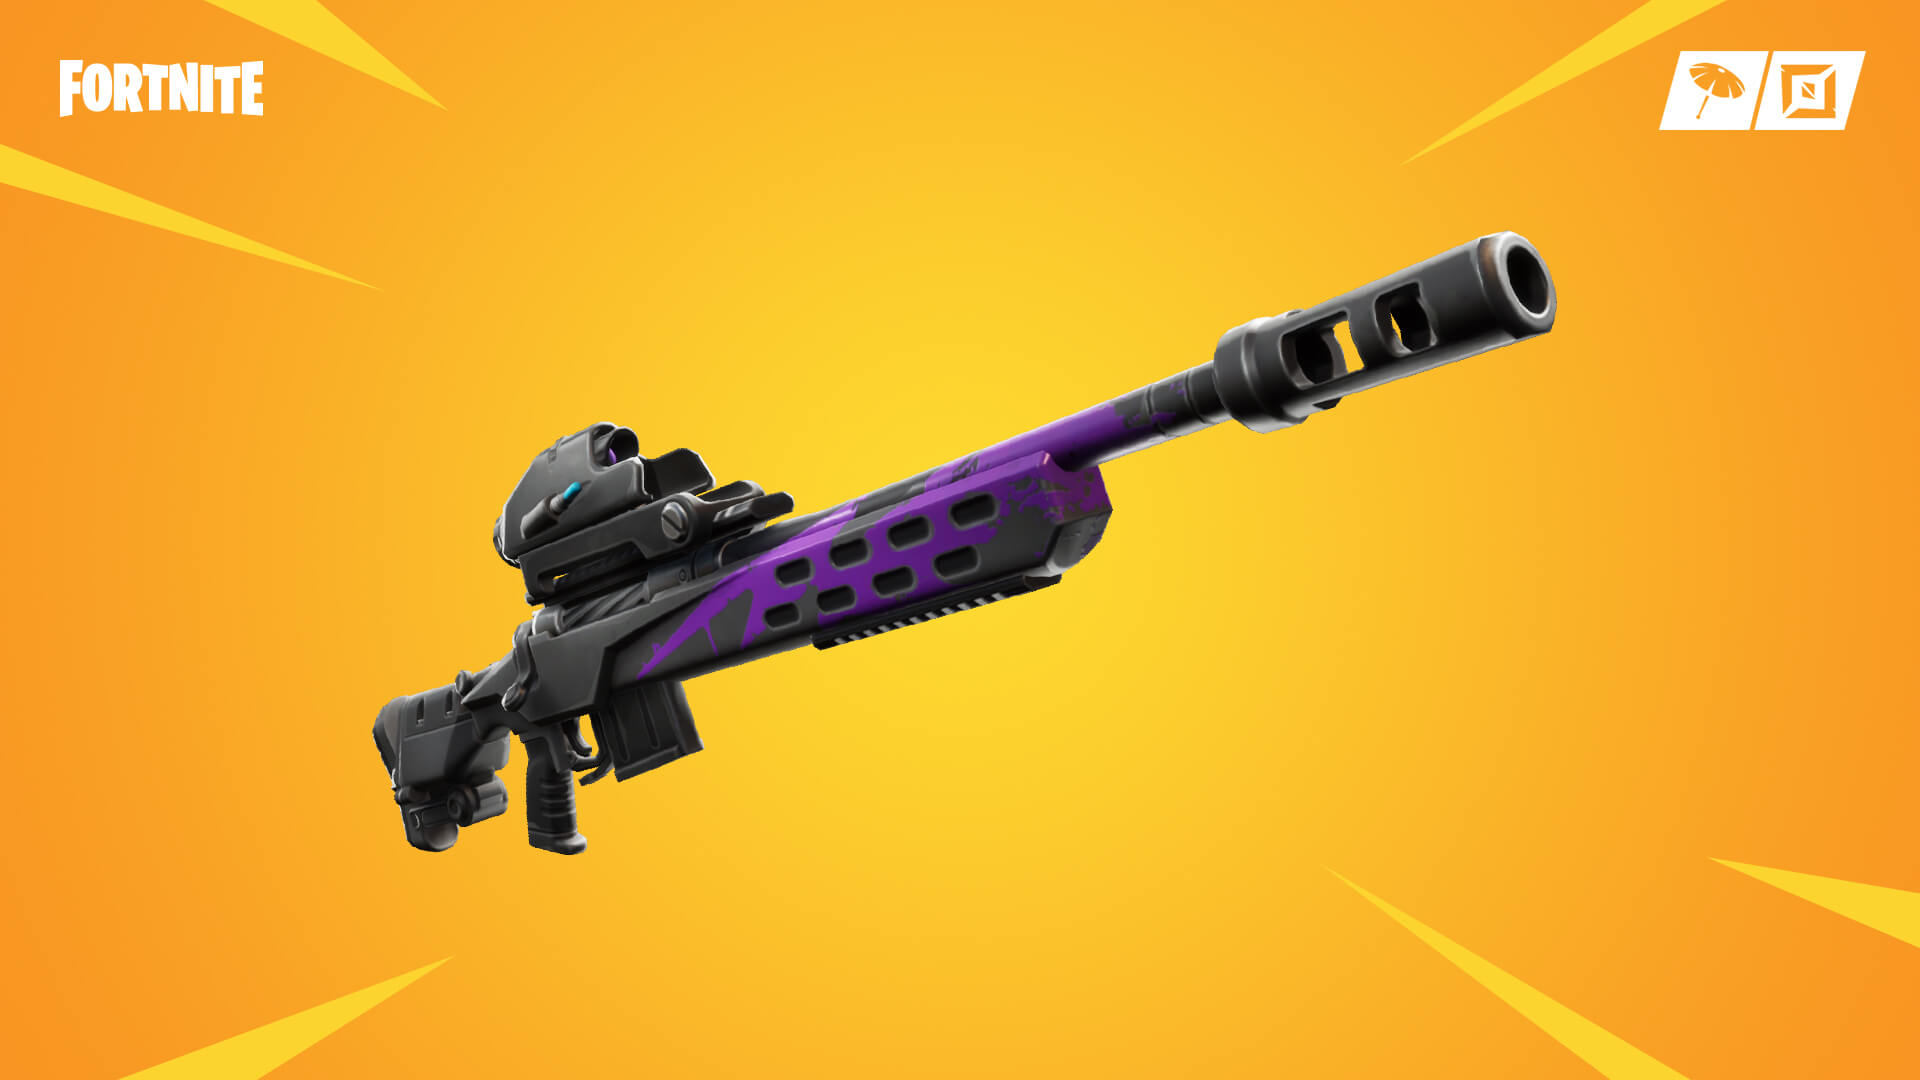 Fortnite Tracker Atlantis Machine Storm Scout Sniper Rifle To Be Disabled From Fortnite World Cup Finals Dot Esports